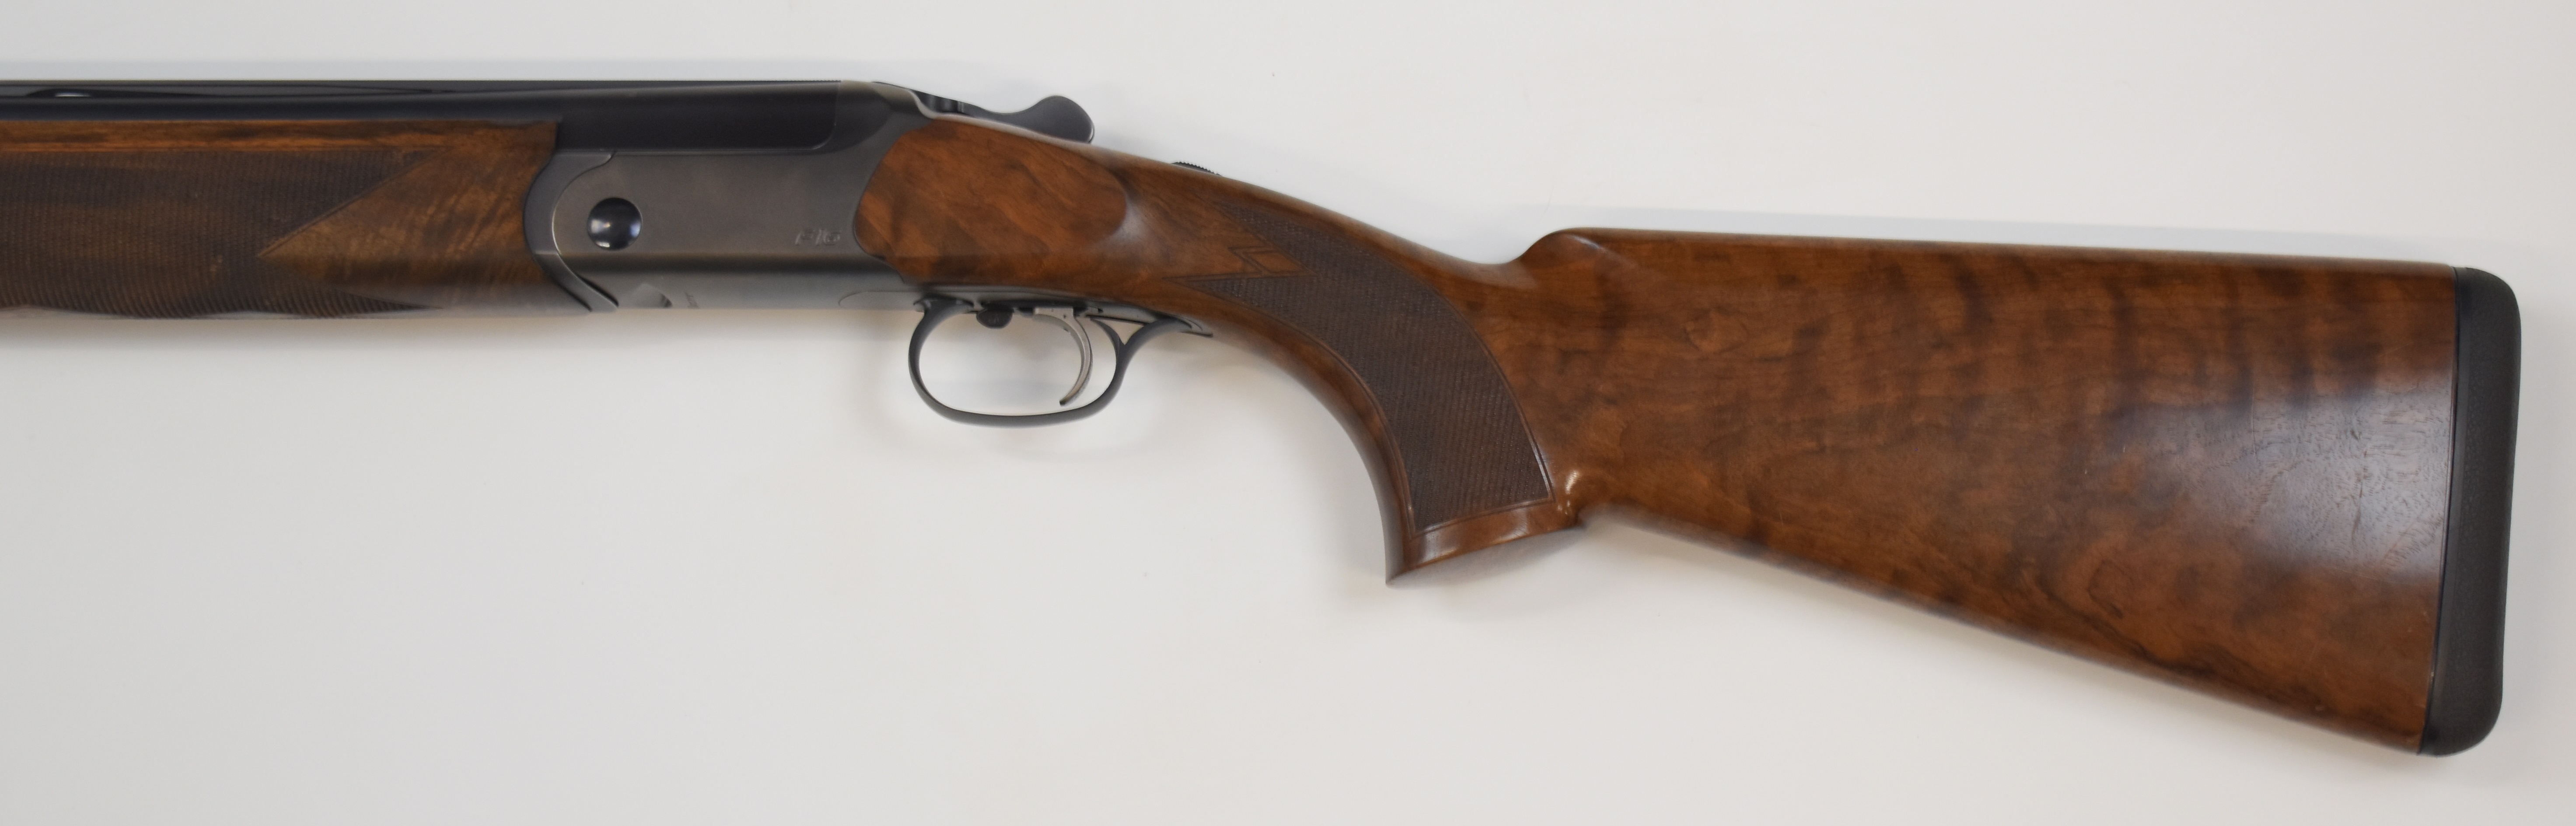 Blaser F16 12 bore over under ejector shotgun with named locks and underside, chequered semi- - Image 8 of 22